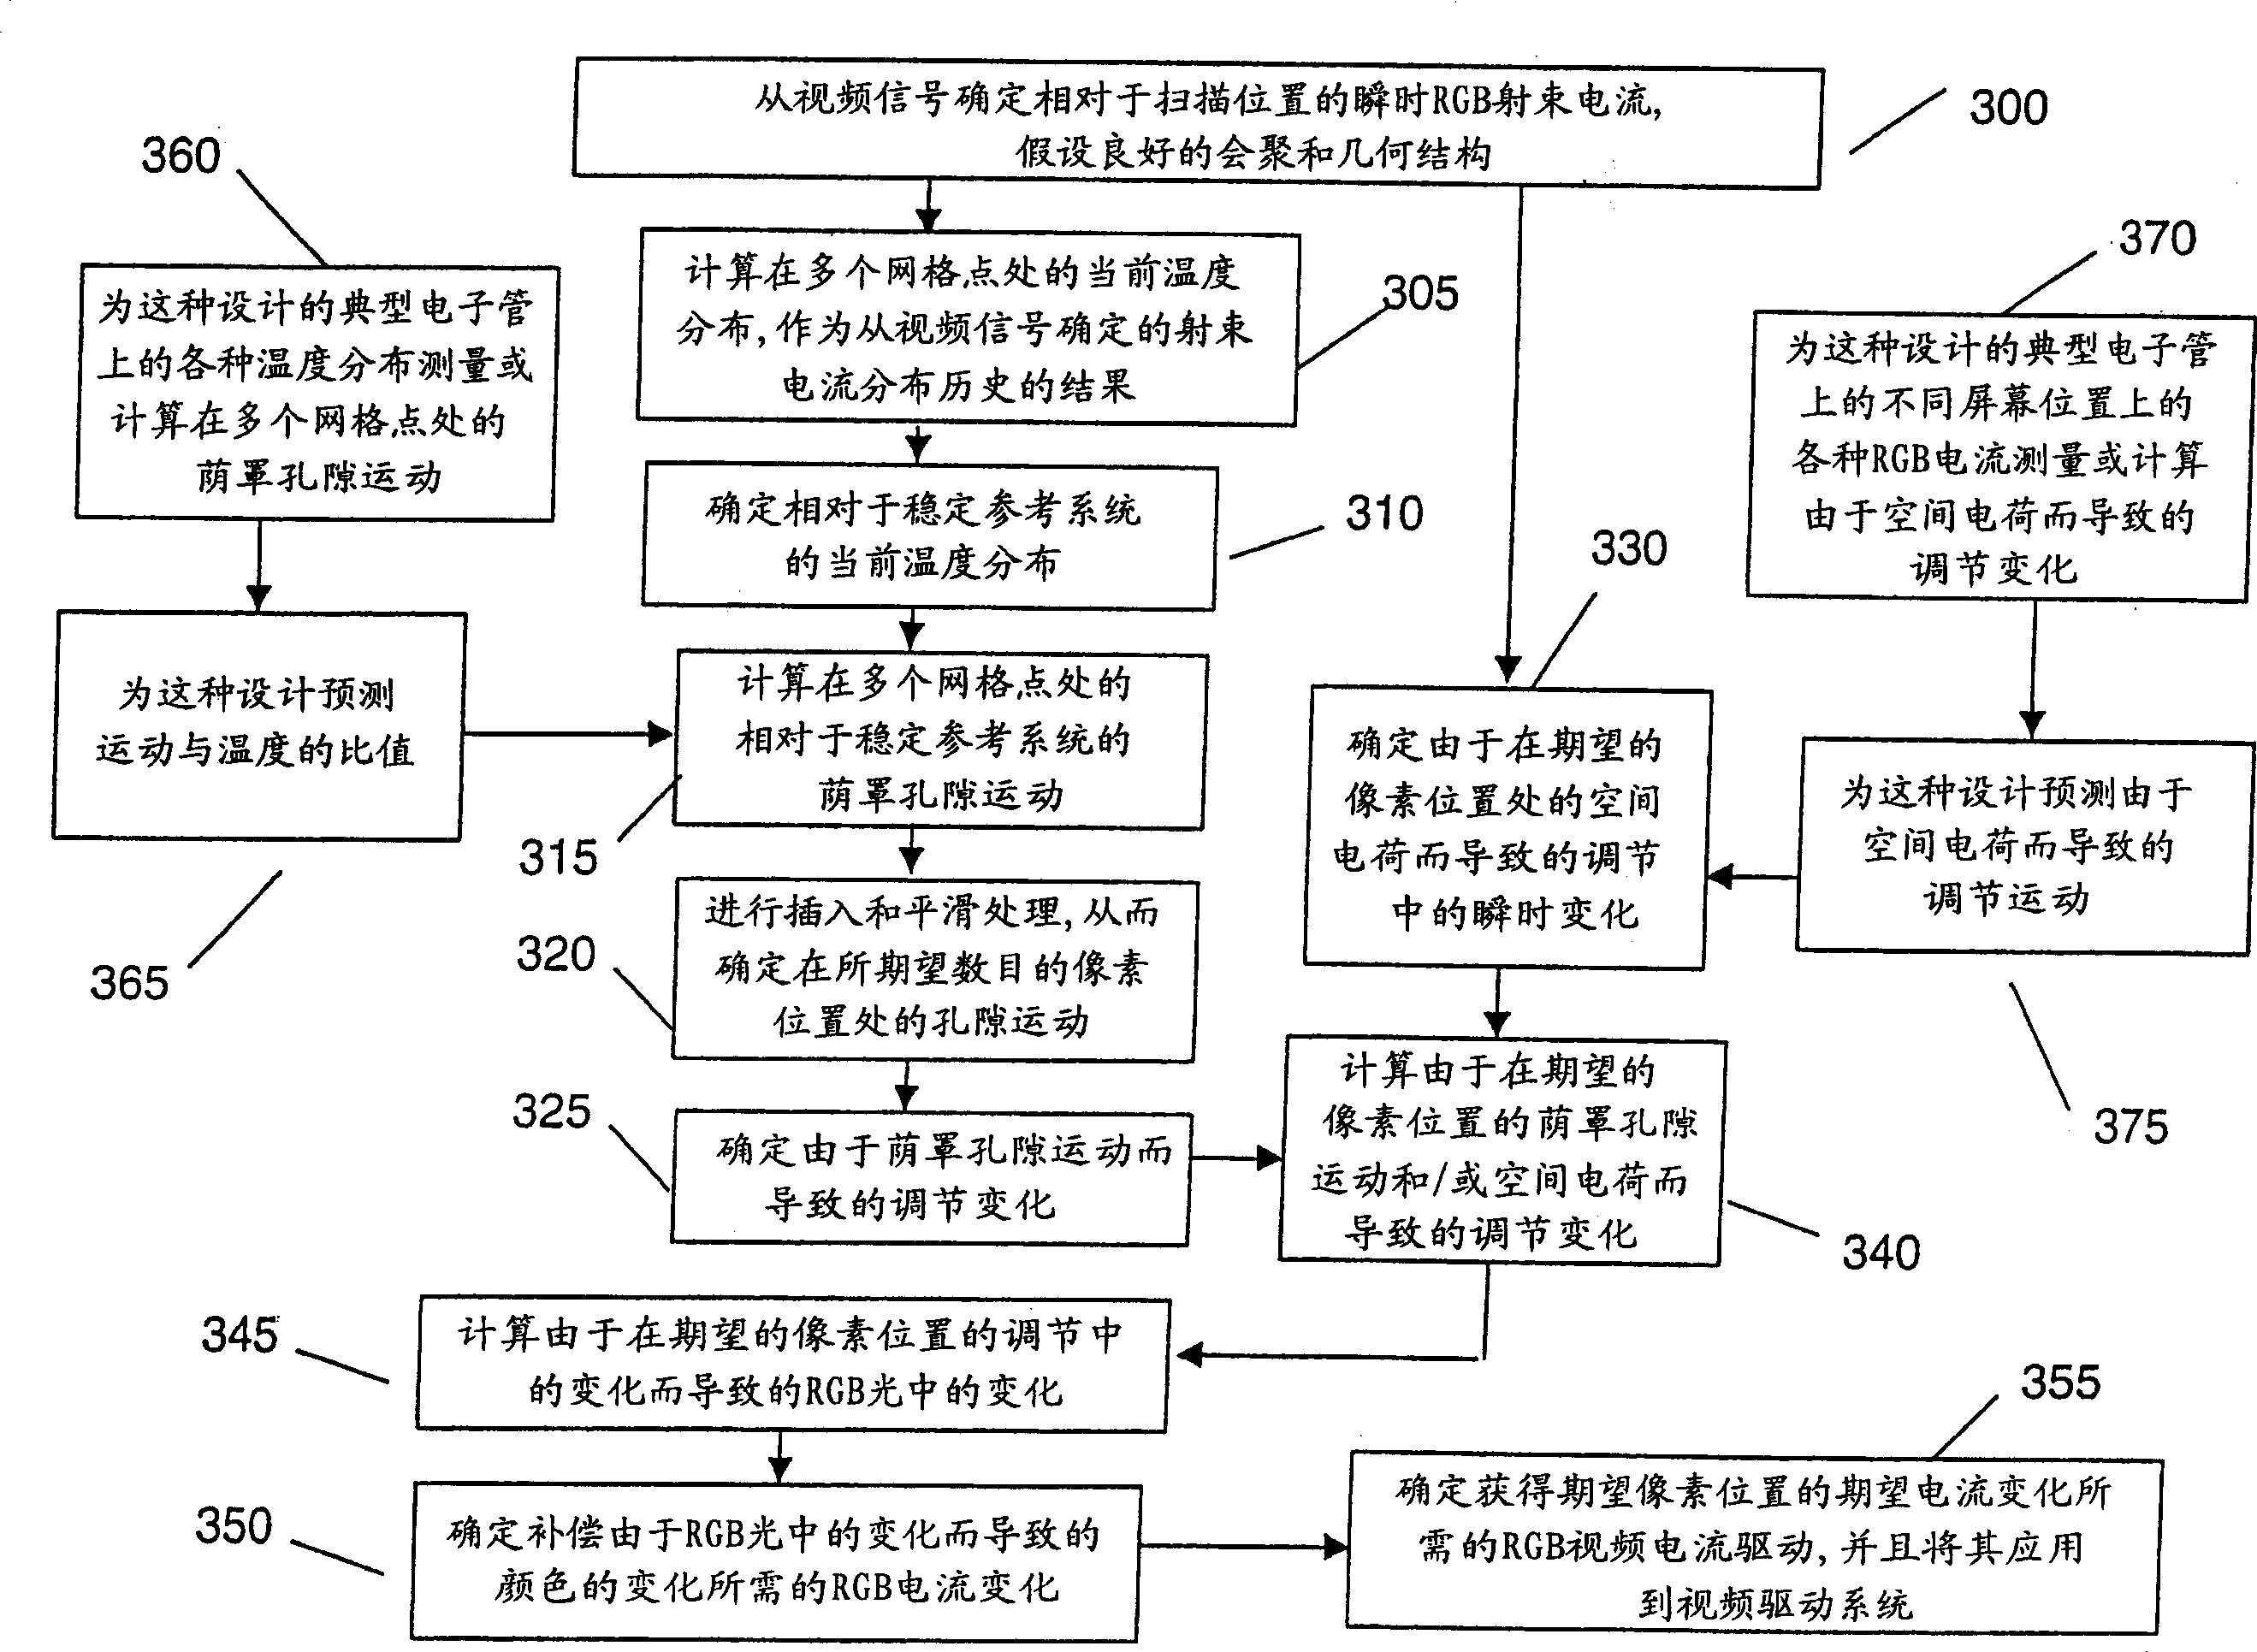 System for maintaining white uniformity in a displayed video image by predicting and compensating for display register changes